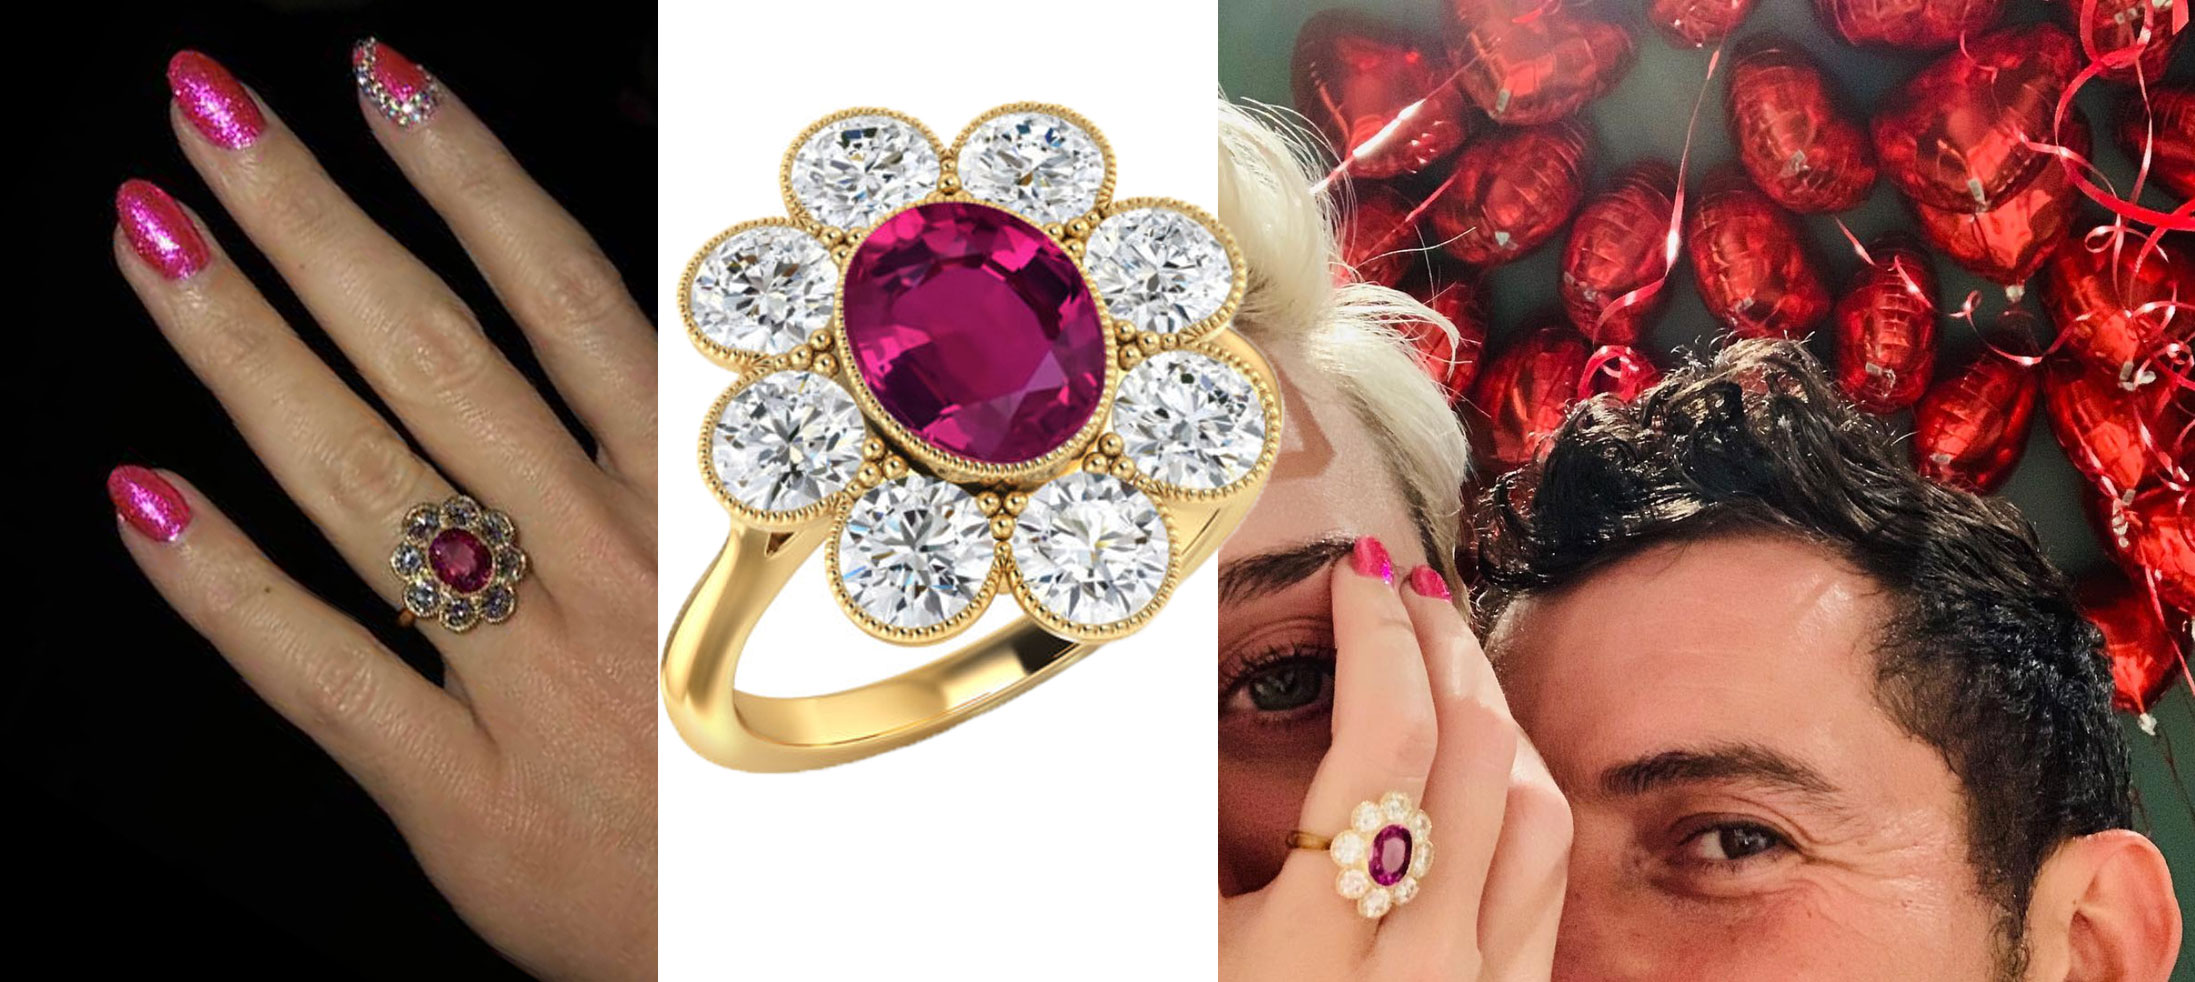 Katy Perry engagement ring